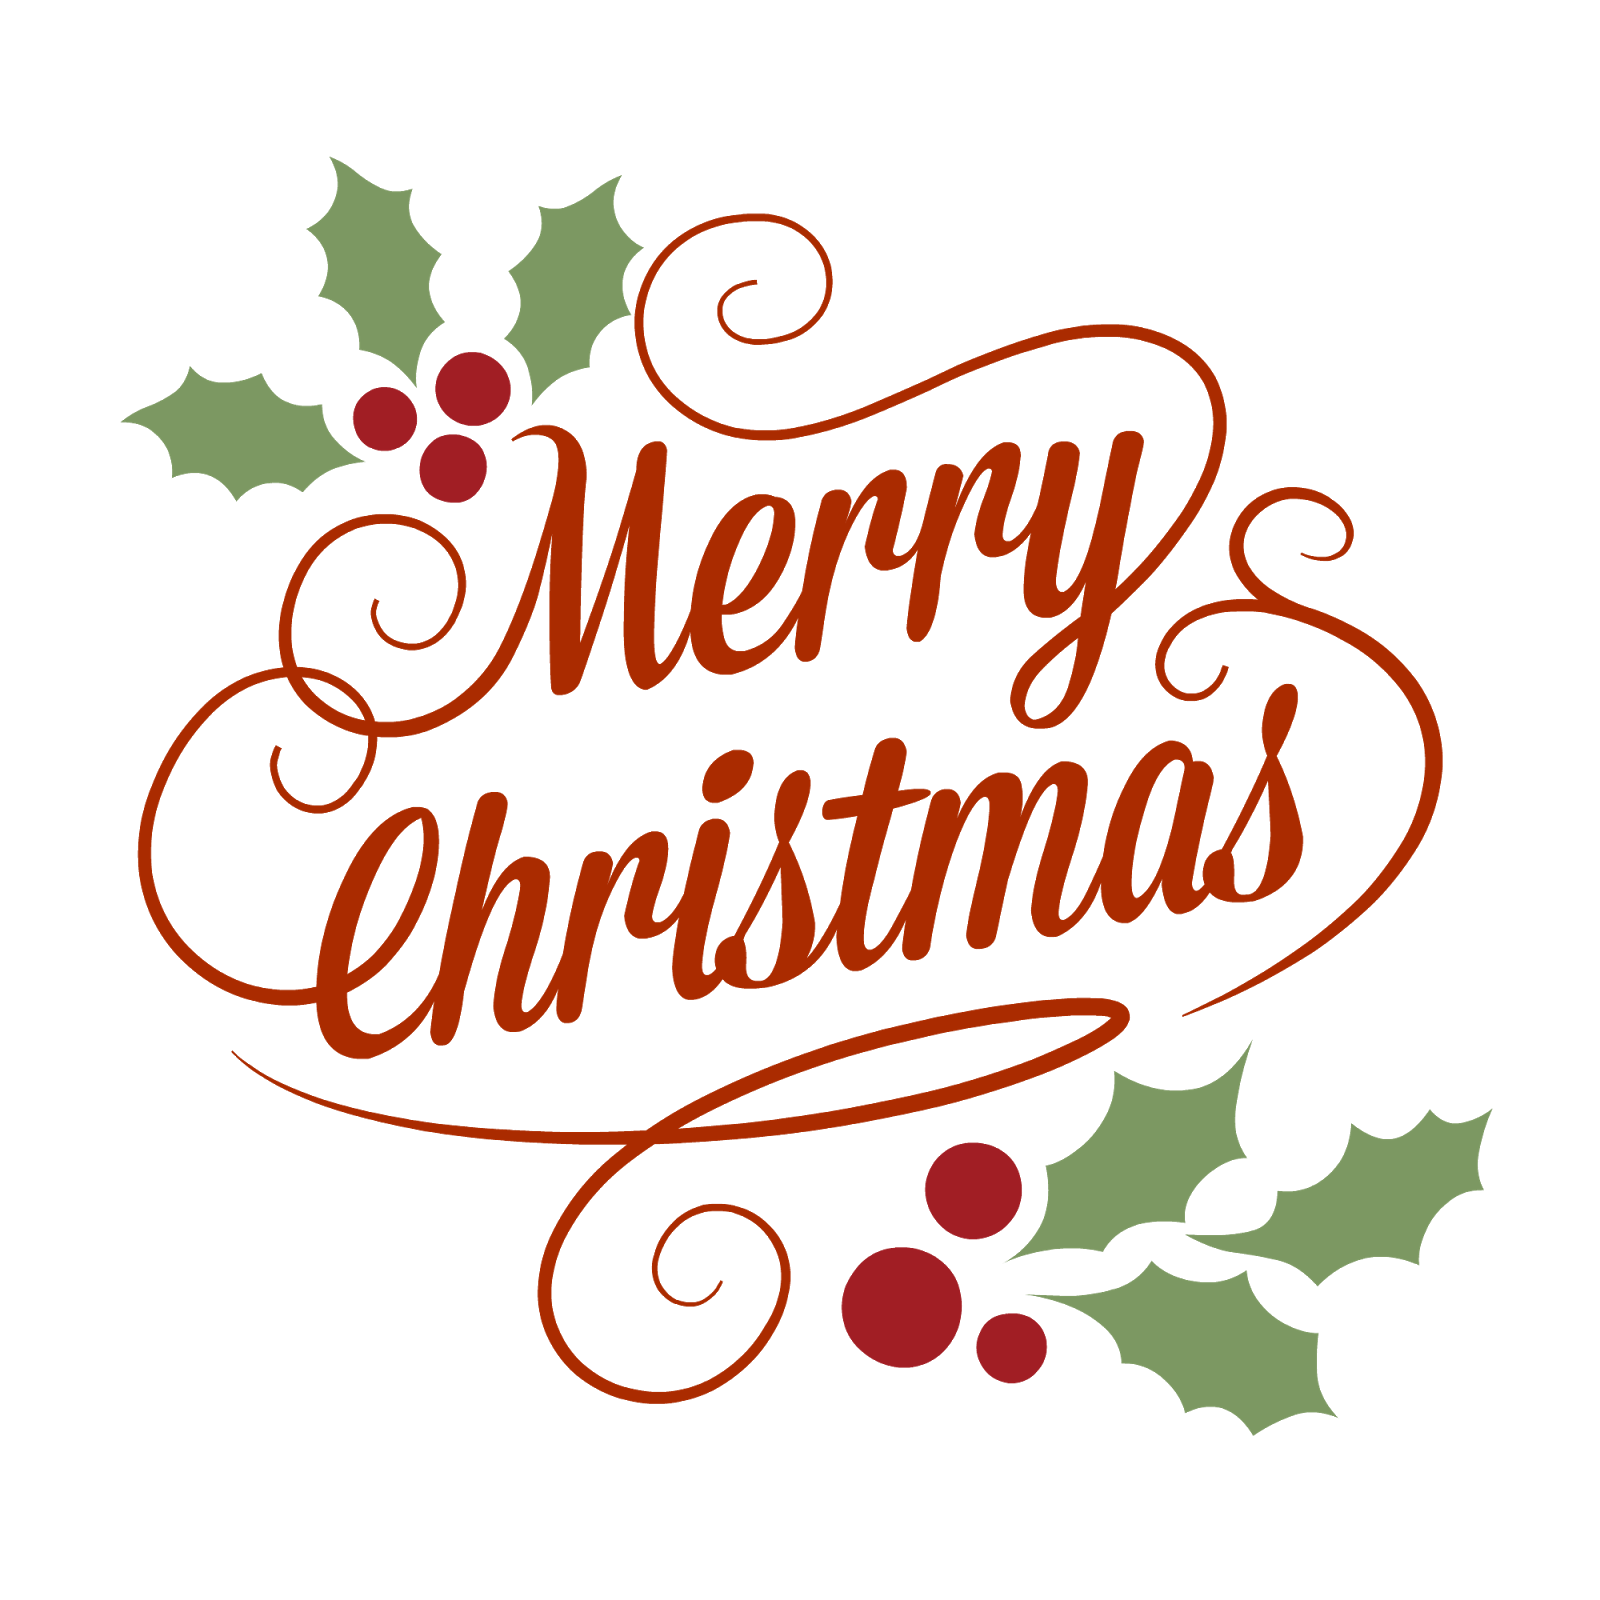 Google.com Christmas Logo - Merry Christmas Transparent PNG Pictures - Free Icons and PNG ...